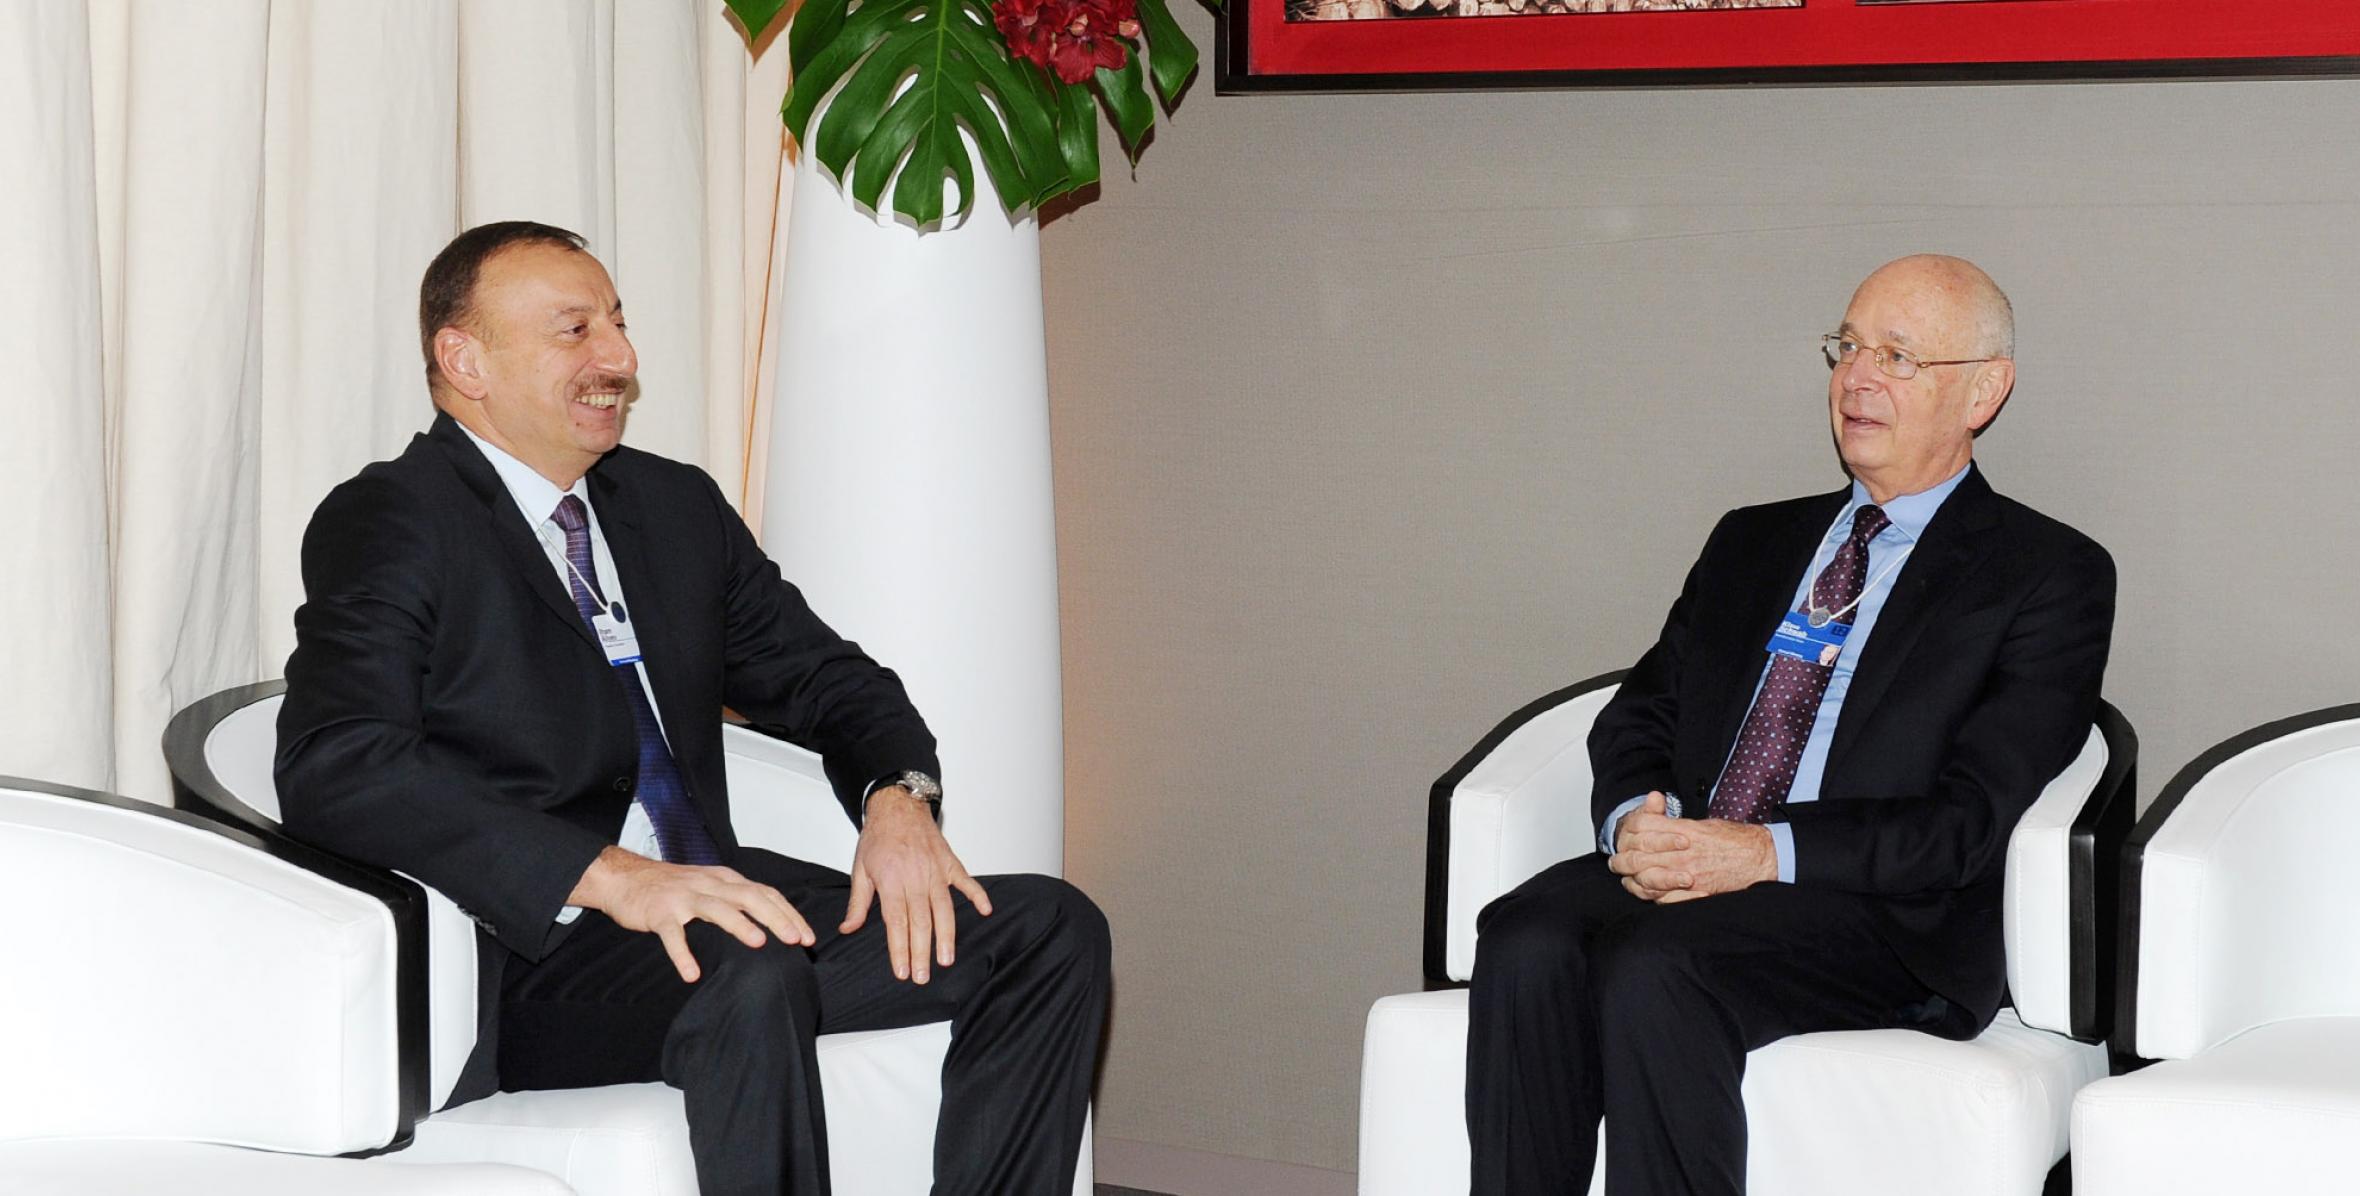 Ilham Aliyev met with founder and executive chairman of the World Economic Forum Klaus Schwab